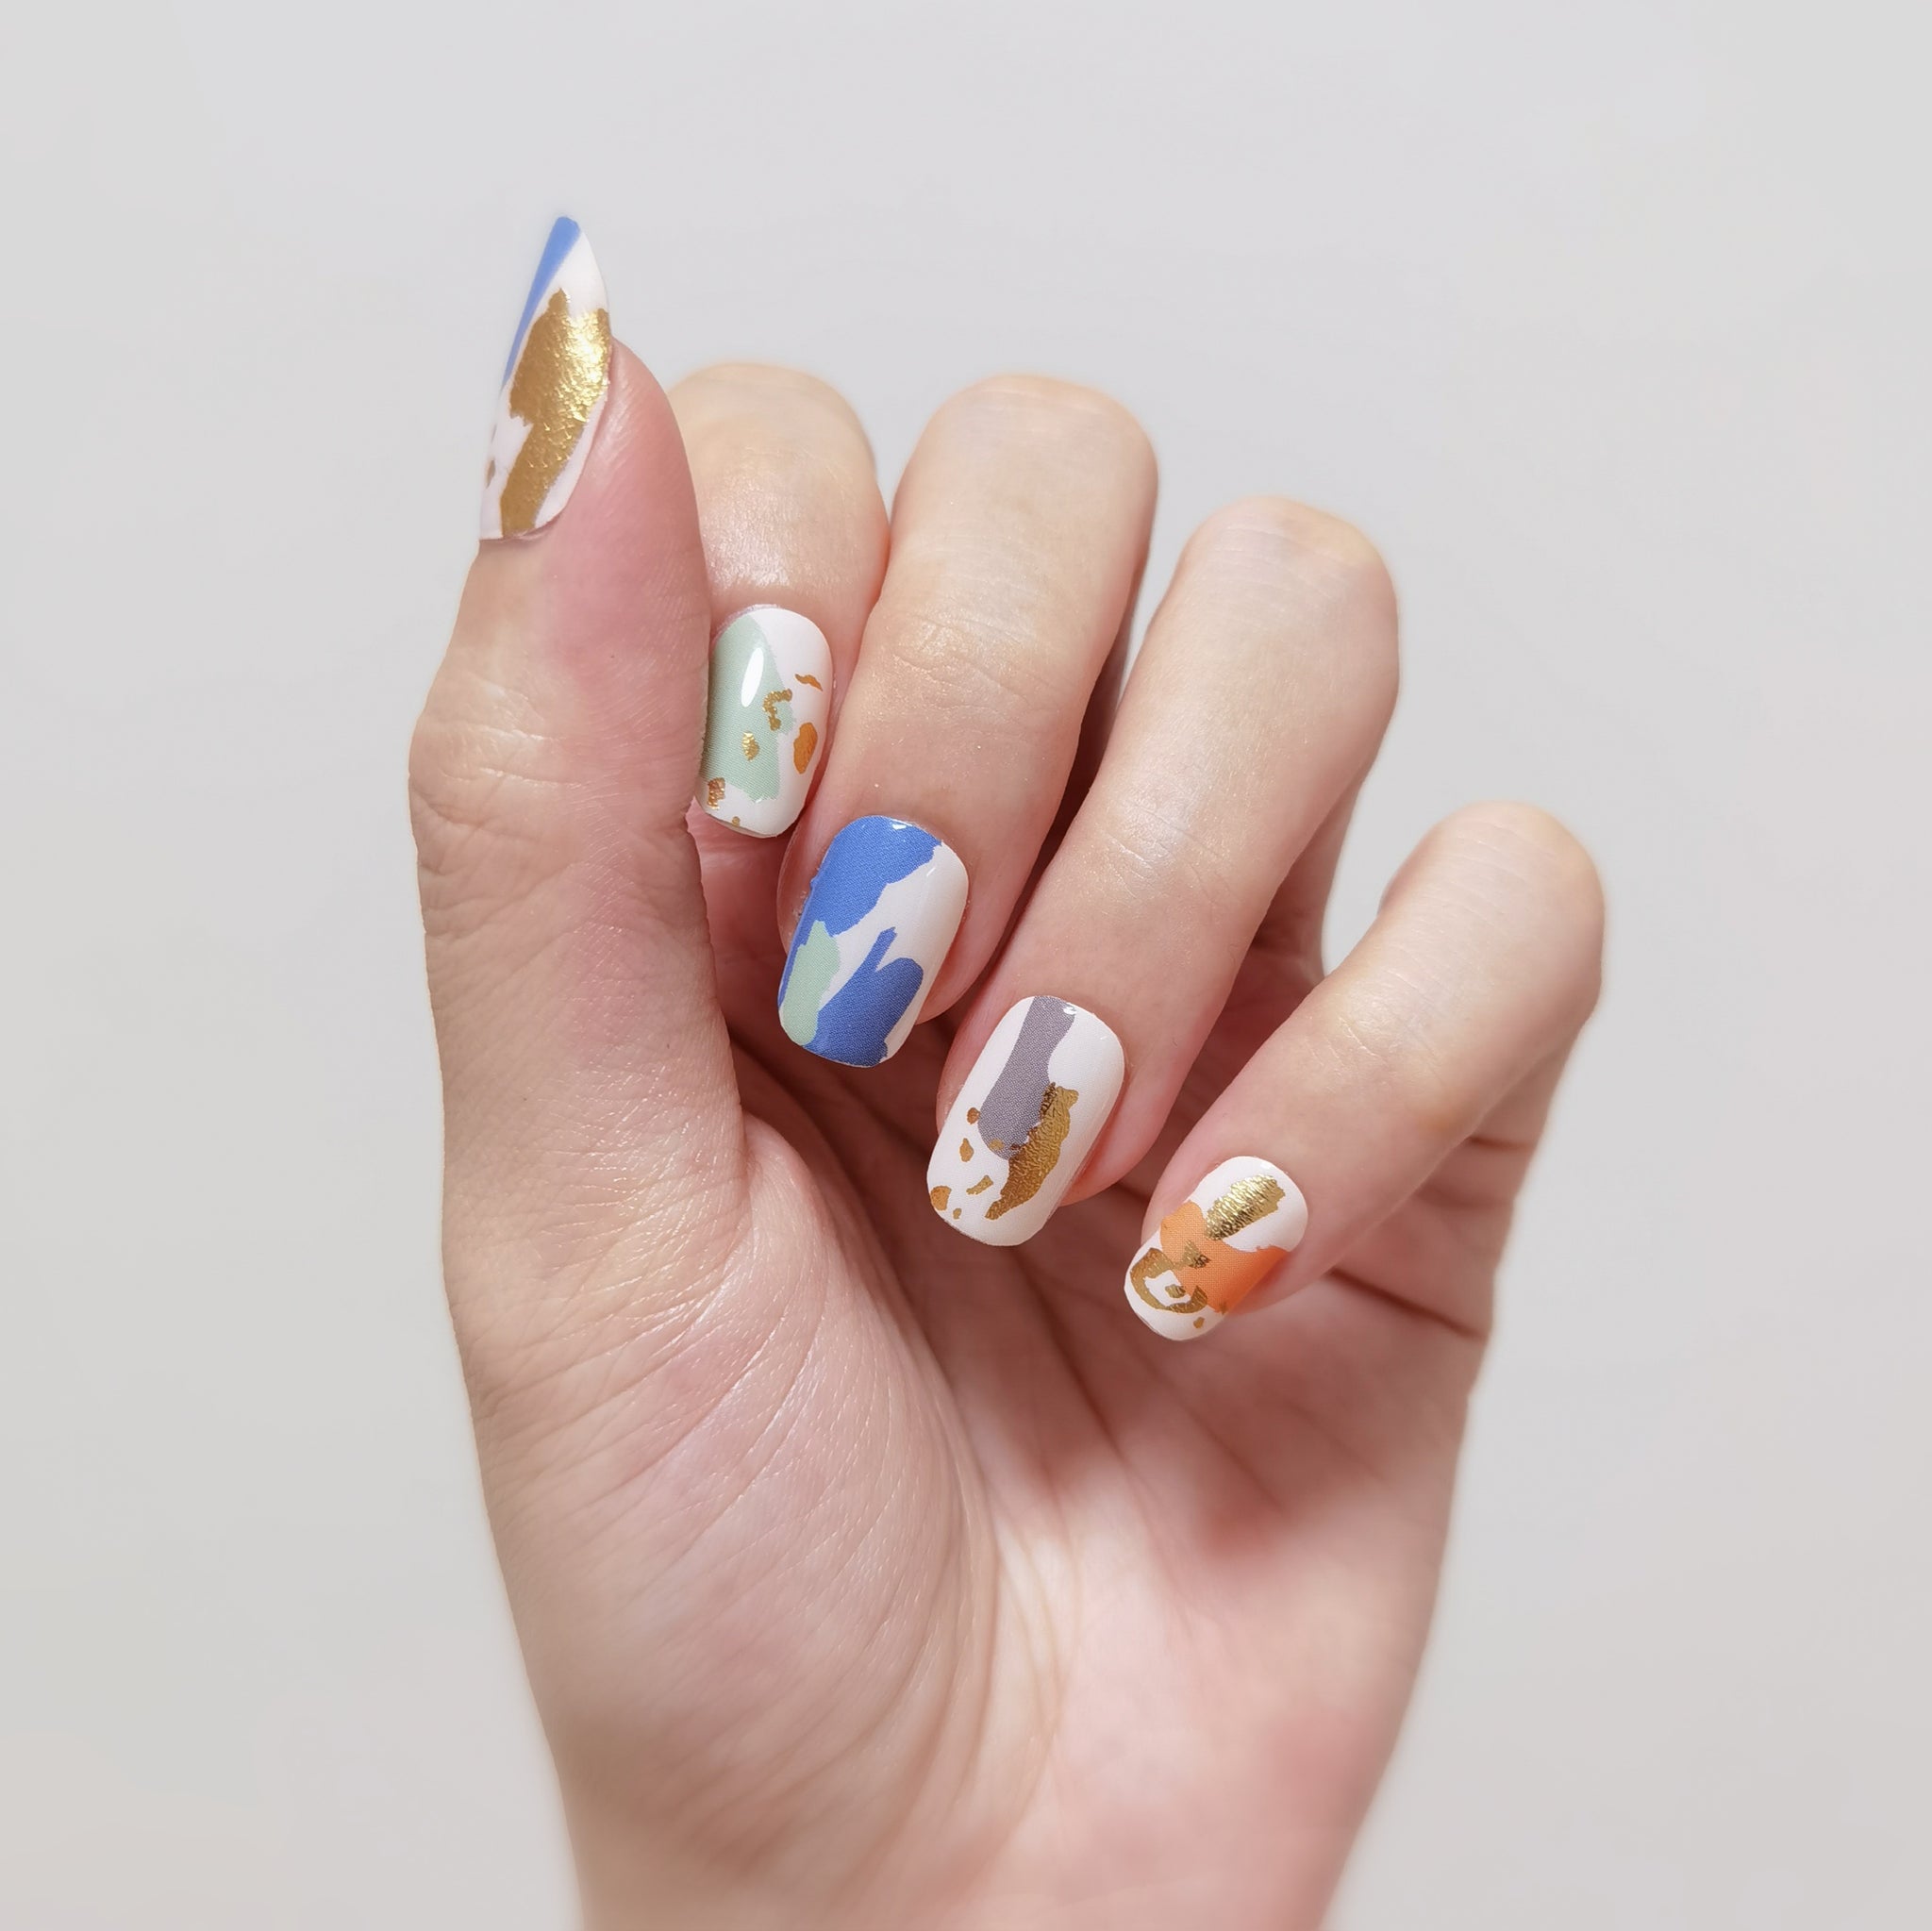 Summer 2019 Nail Trends and Manicure Ideas - 30 Summer Nail Designs